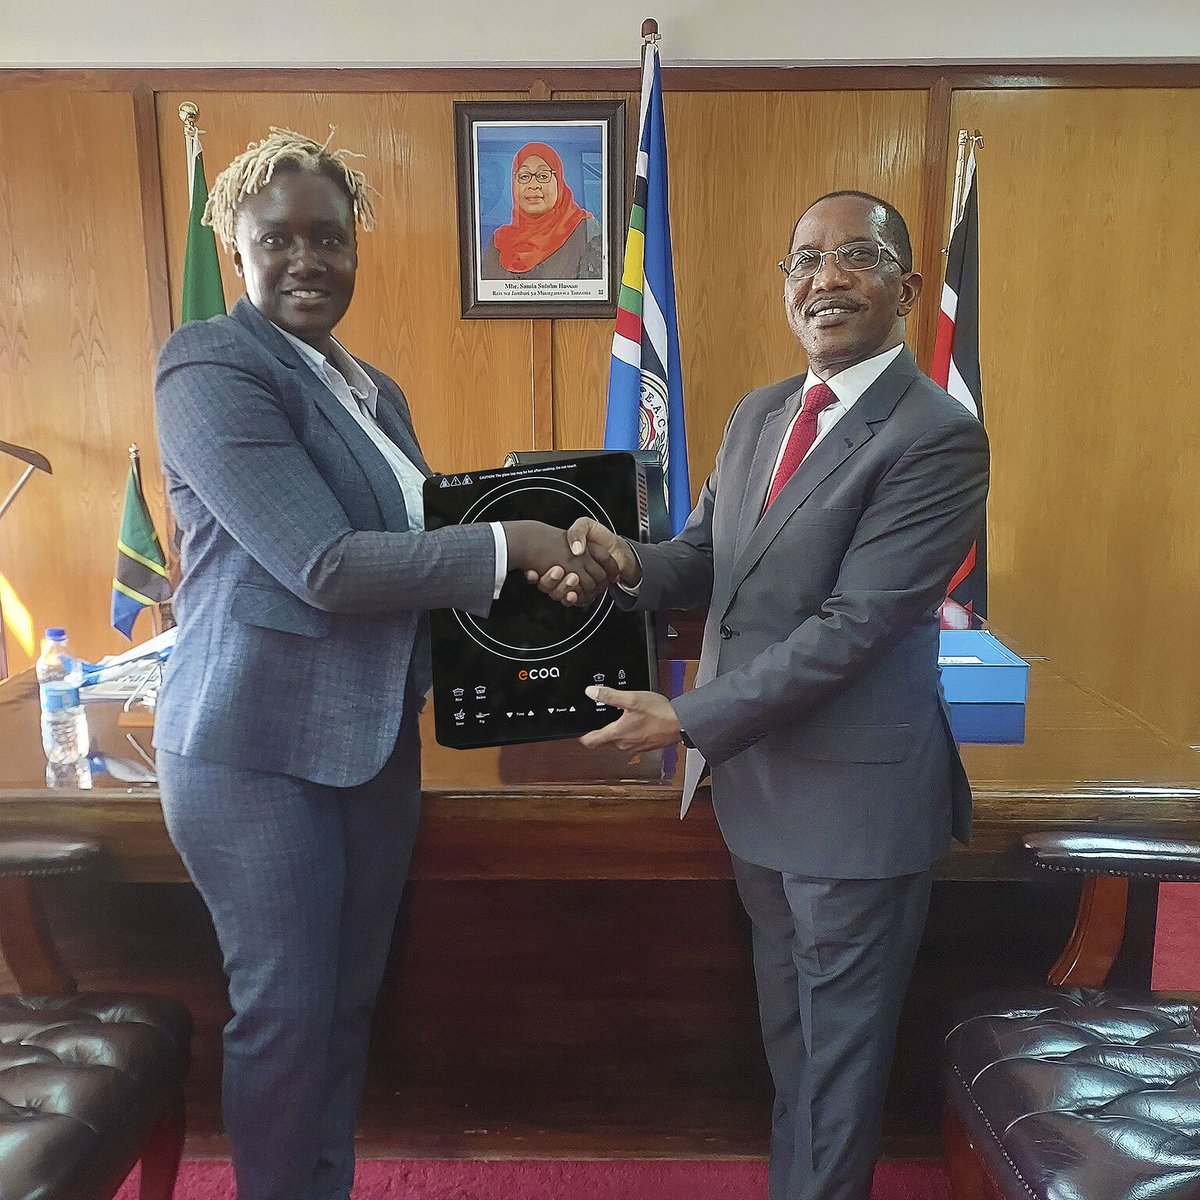 Our Corporate Affairs Director met Tanzanian High Commissioner, H.E. Dr. Bernard Yohana Kibesse, at the Tanzania Embassy in Nairobi. BURN has distributed 100,000+ biomass and electric products in Tanzania and we are aiming to transition 3M households to clean cooking by 2026.